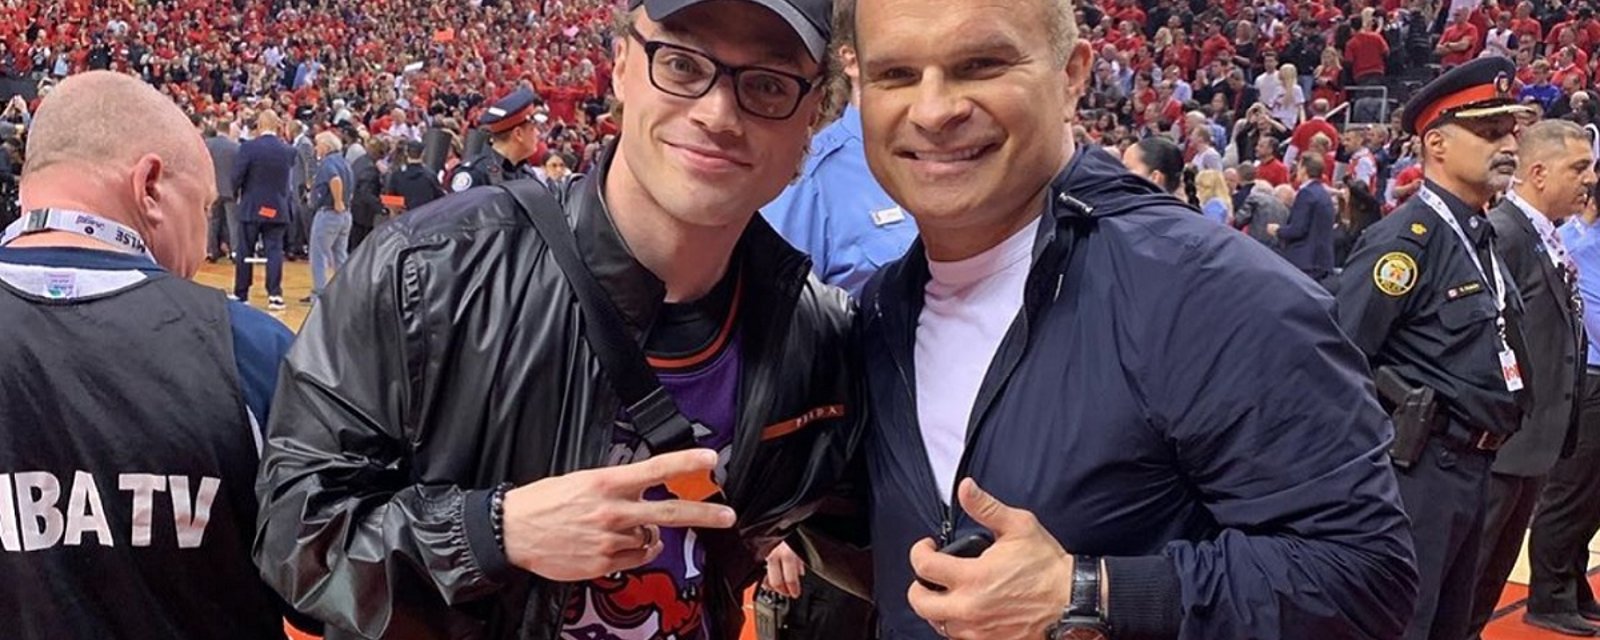 Habs star Max Domi mocks the Maple Leafs during Raptors Game 6.